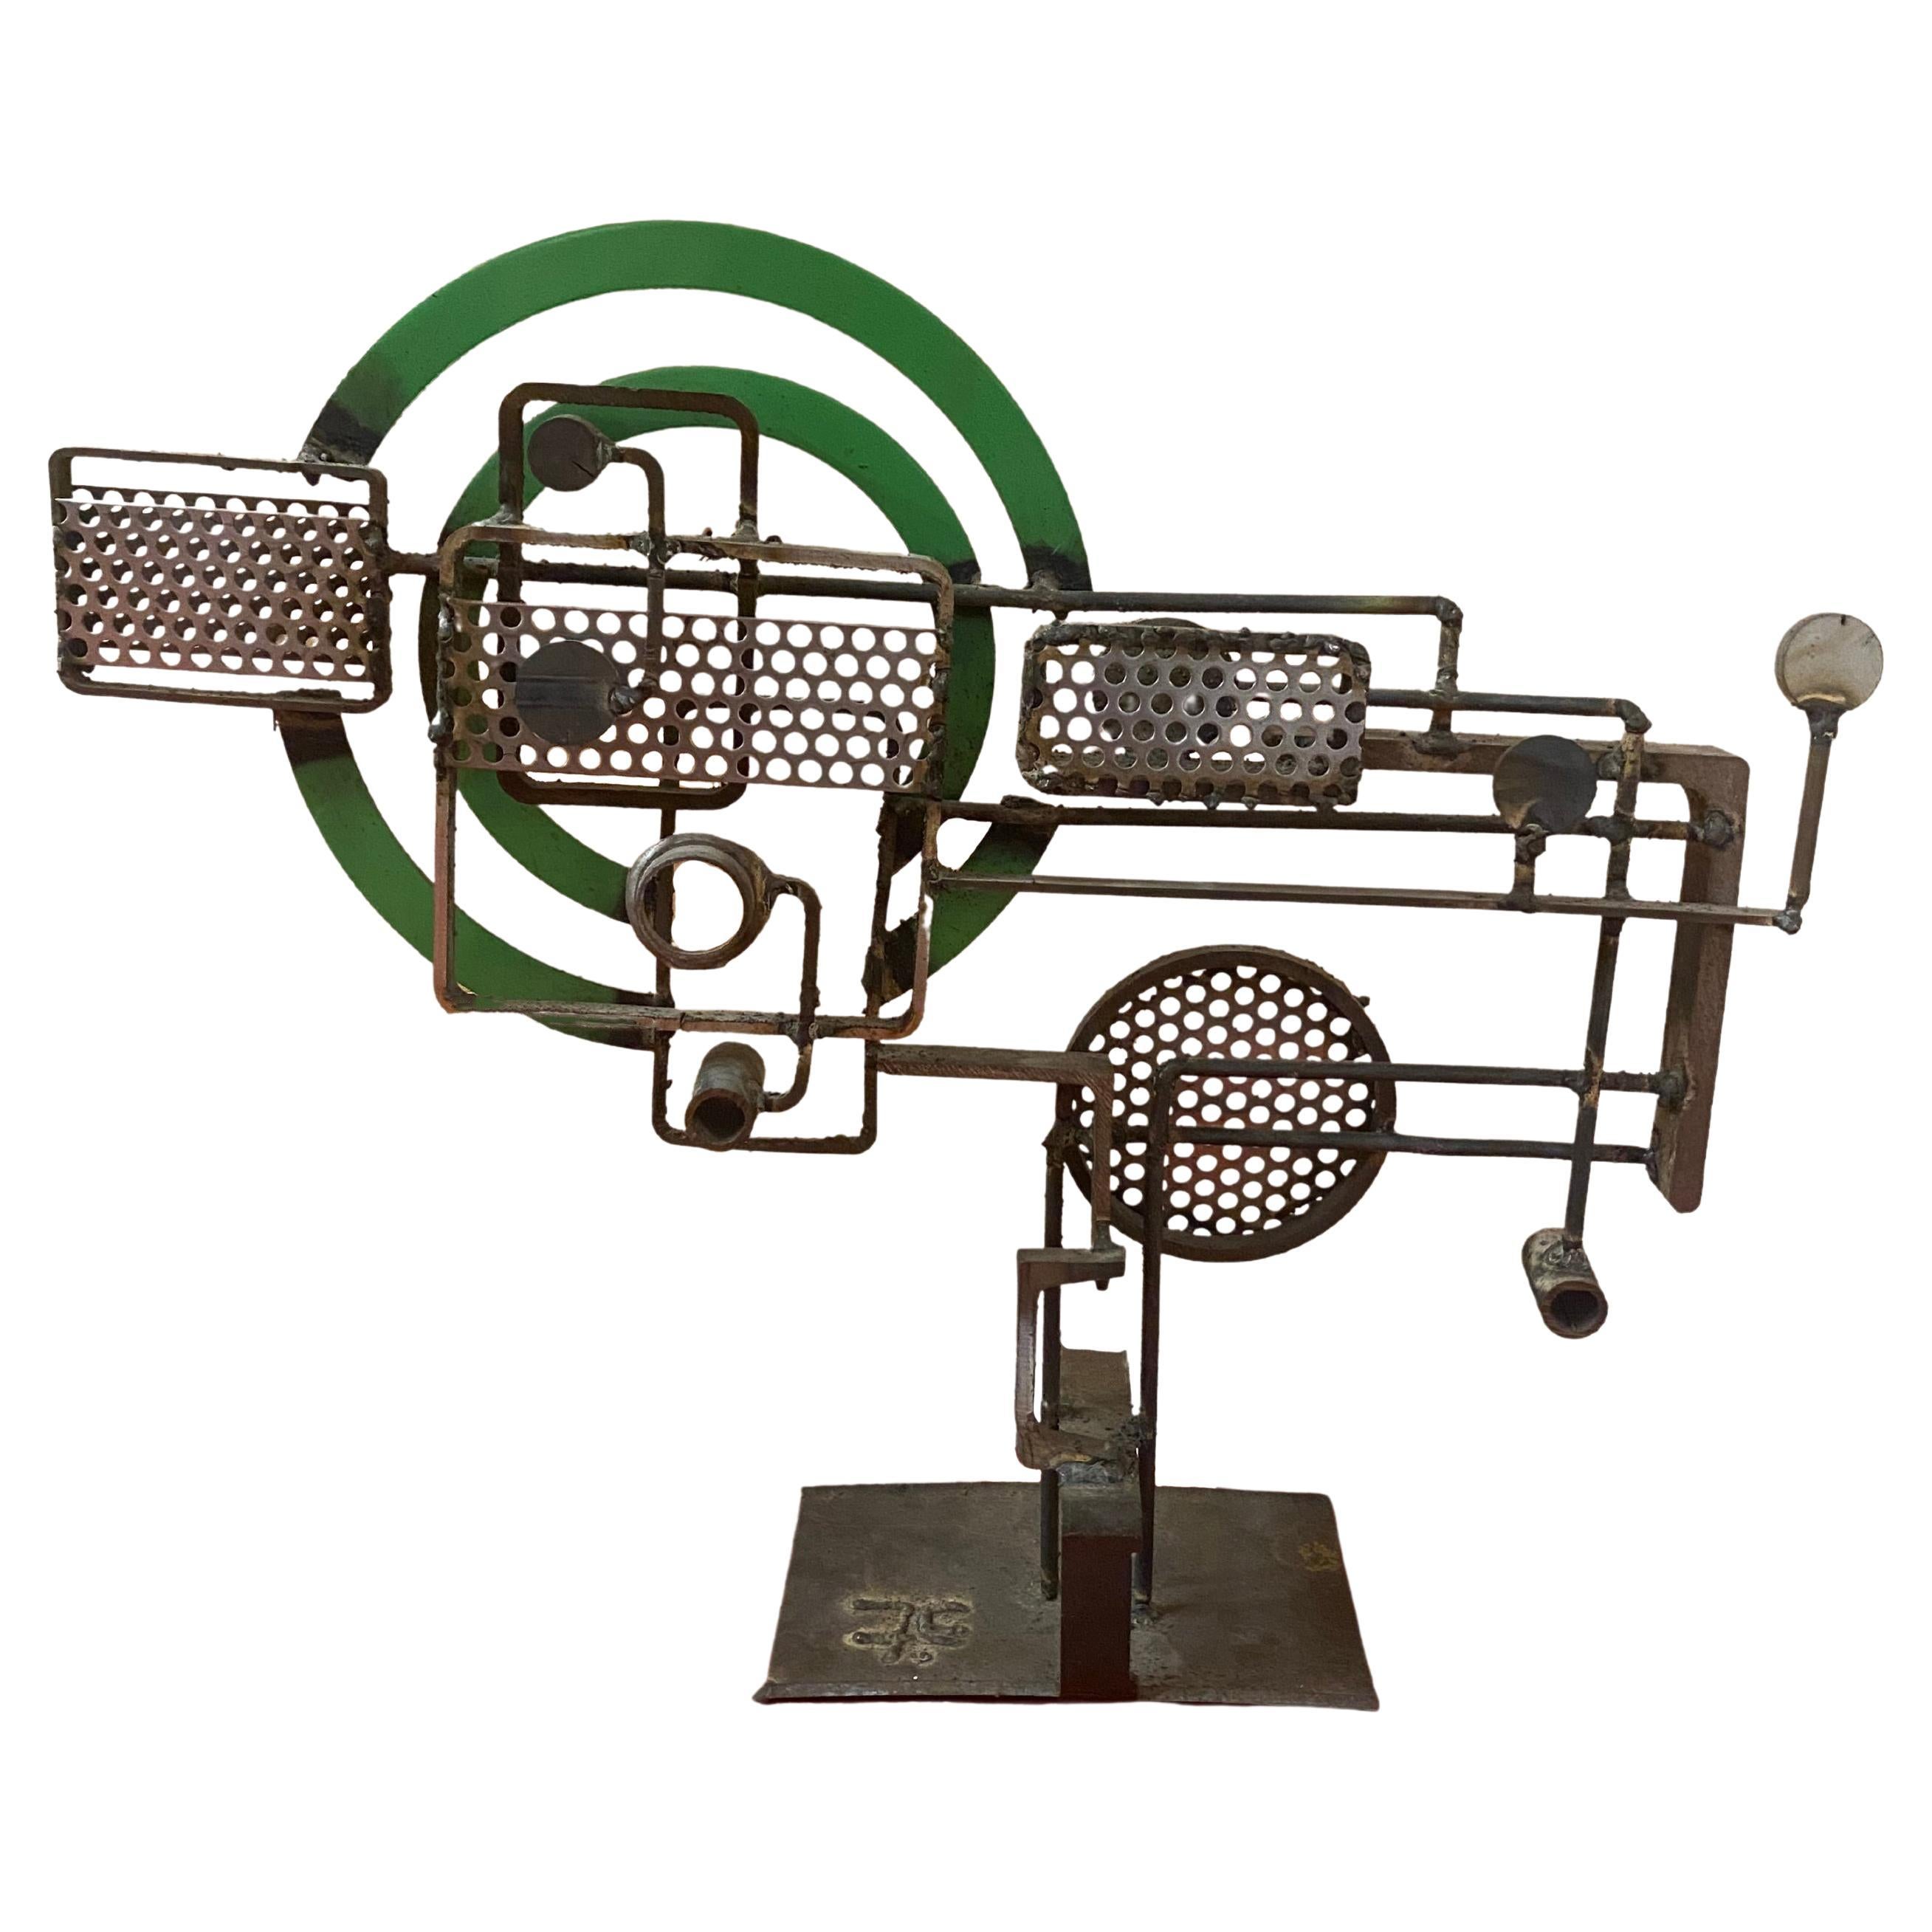 Horizontal Brutalist Green and Metal Abstract Sculpture by Frank Cota For Sale